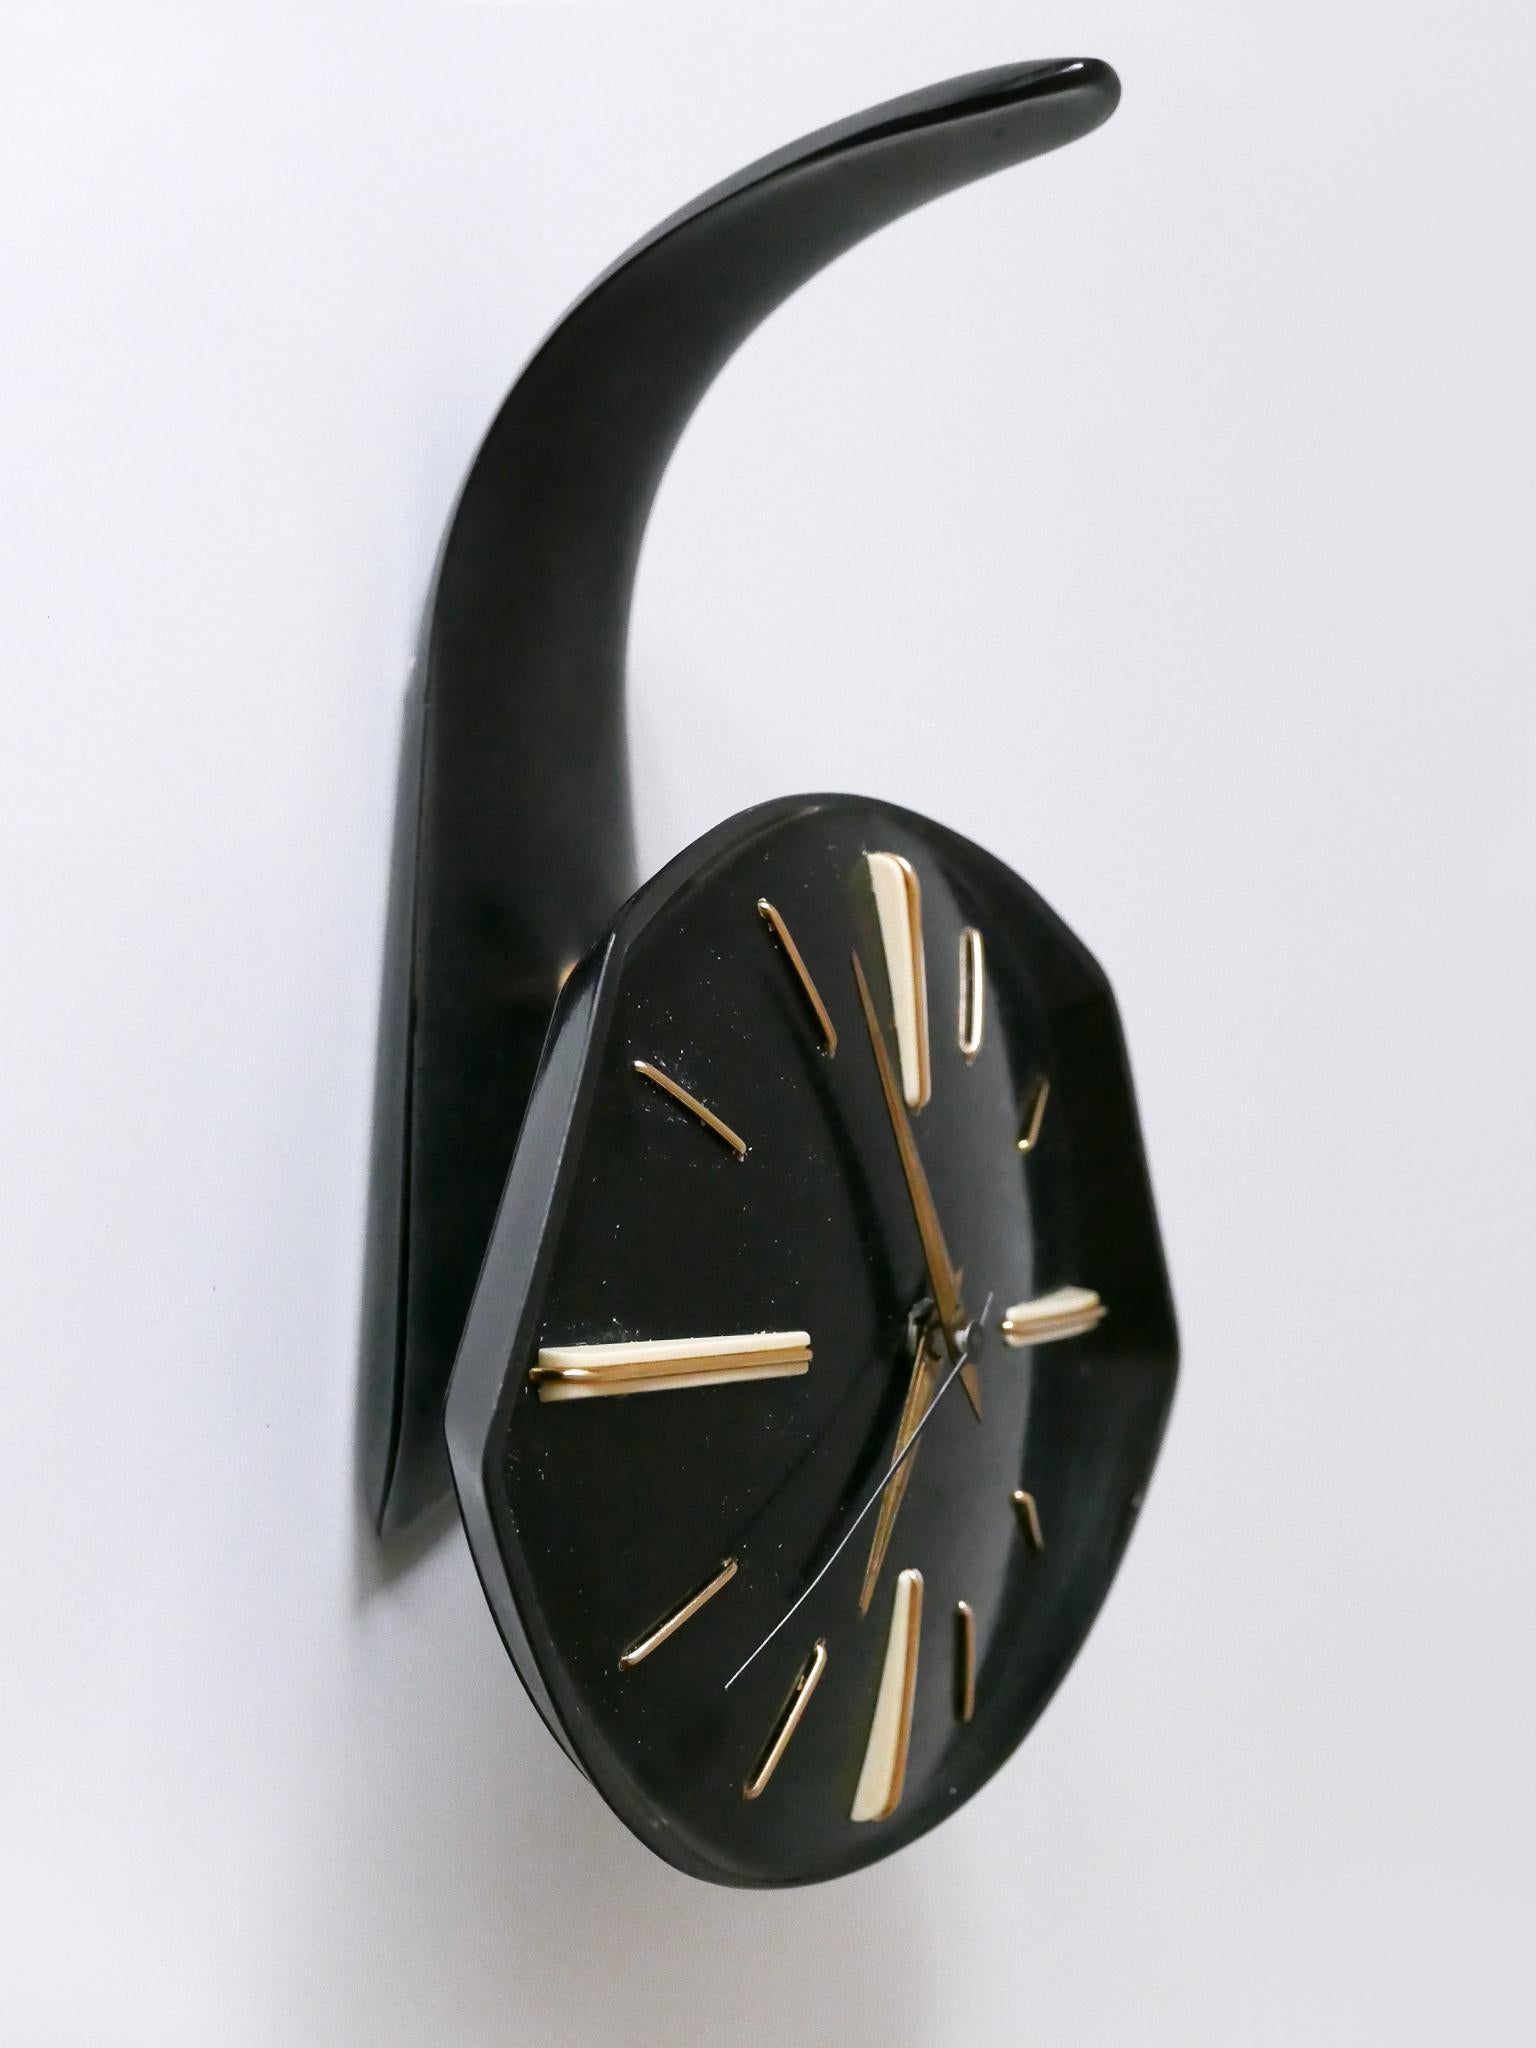 Rare and Lovely Mid-Century Modern Bakelite Table or Wall Clock by PRIM 1950s For Sale 4